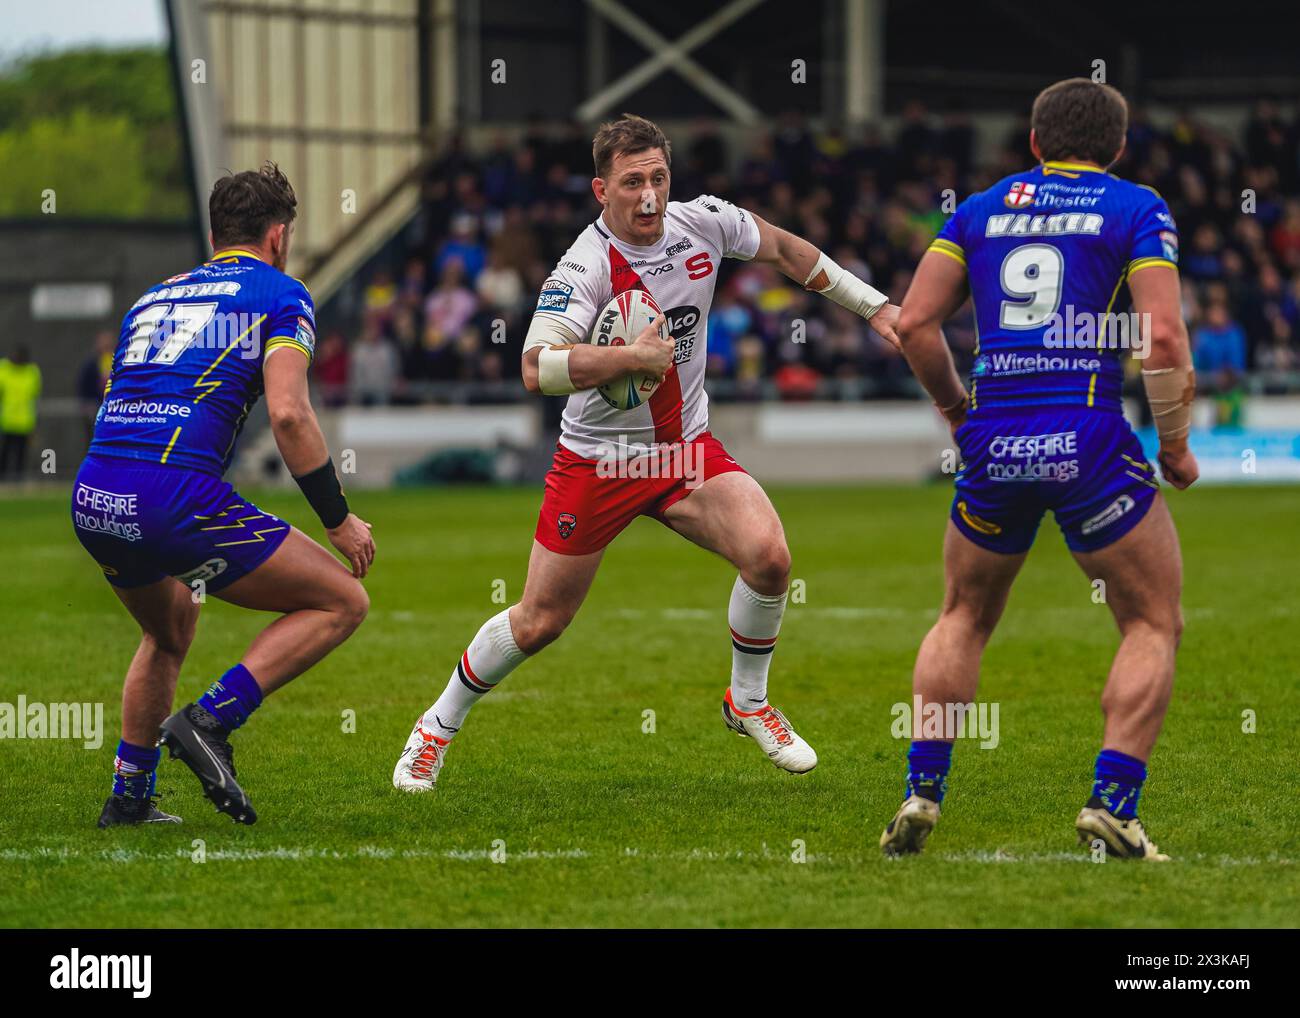 Salford, Manchester, UK. 27th April, 2024. Super League Rugby: Salford Red Devils Vs Warrington Wolves at Salford Community Stadium. ANDREW DIXON looking to create space between DANNY WALKER AND JORDY CROWTHER. Credit James Giblin/Alamy Live News. Stock Photo